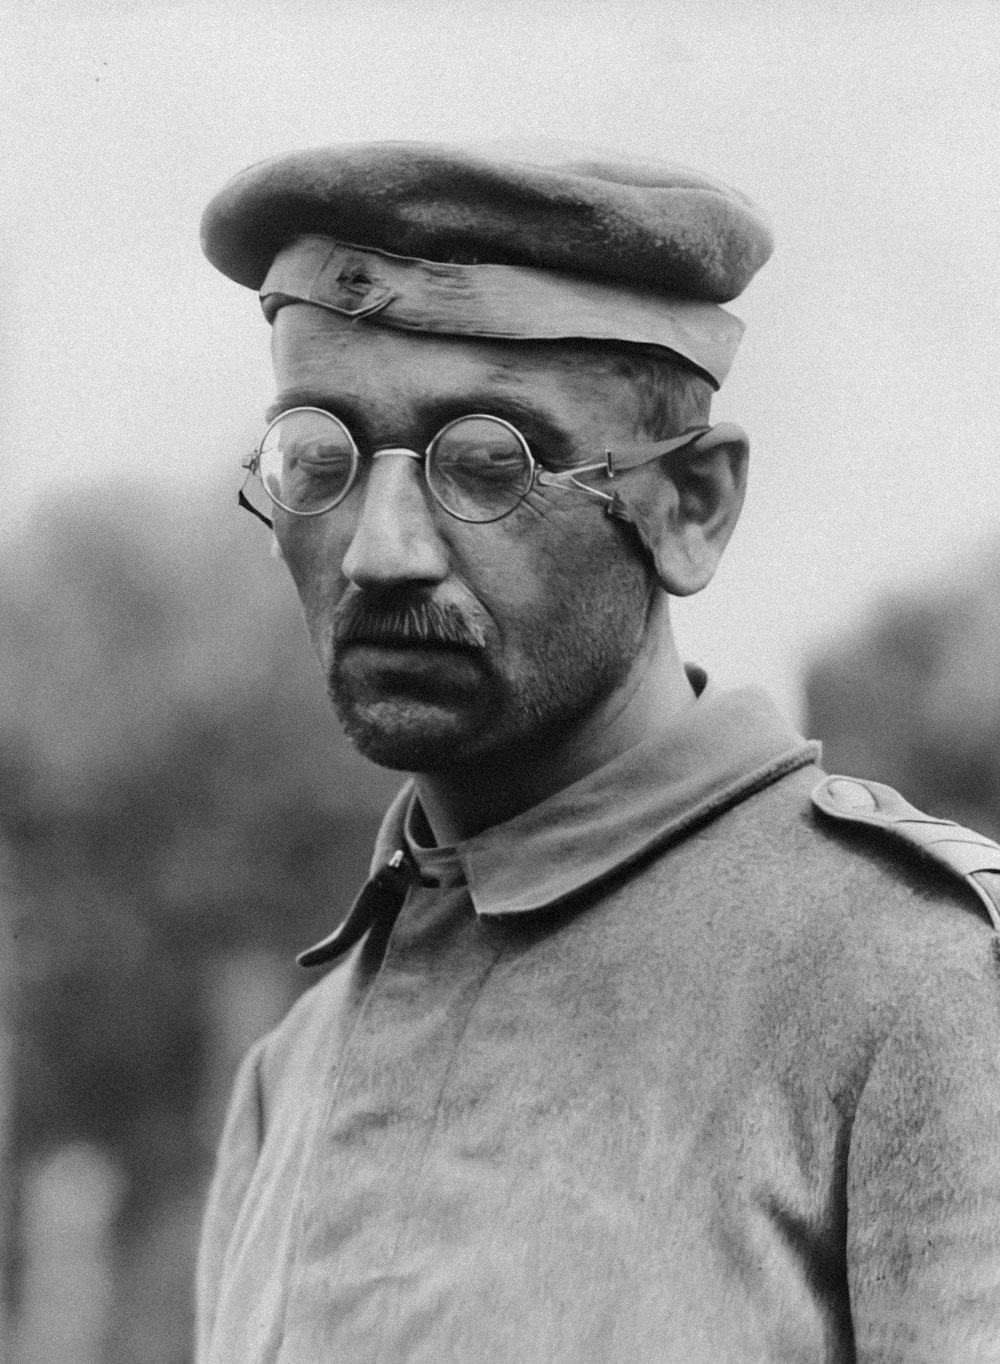 a black and white photo of a man wearing a hat and glasses